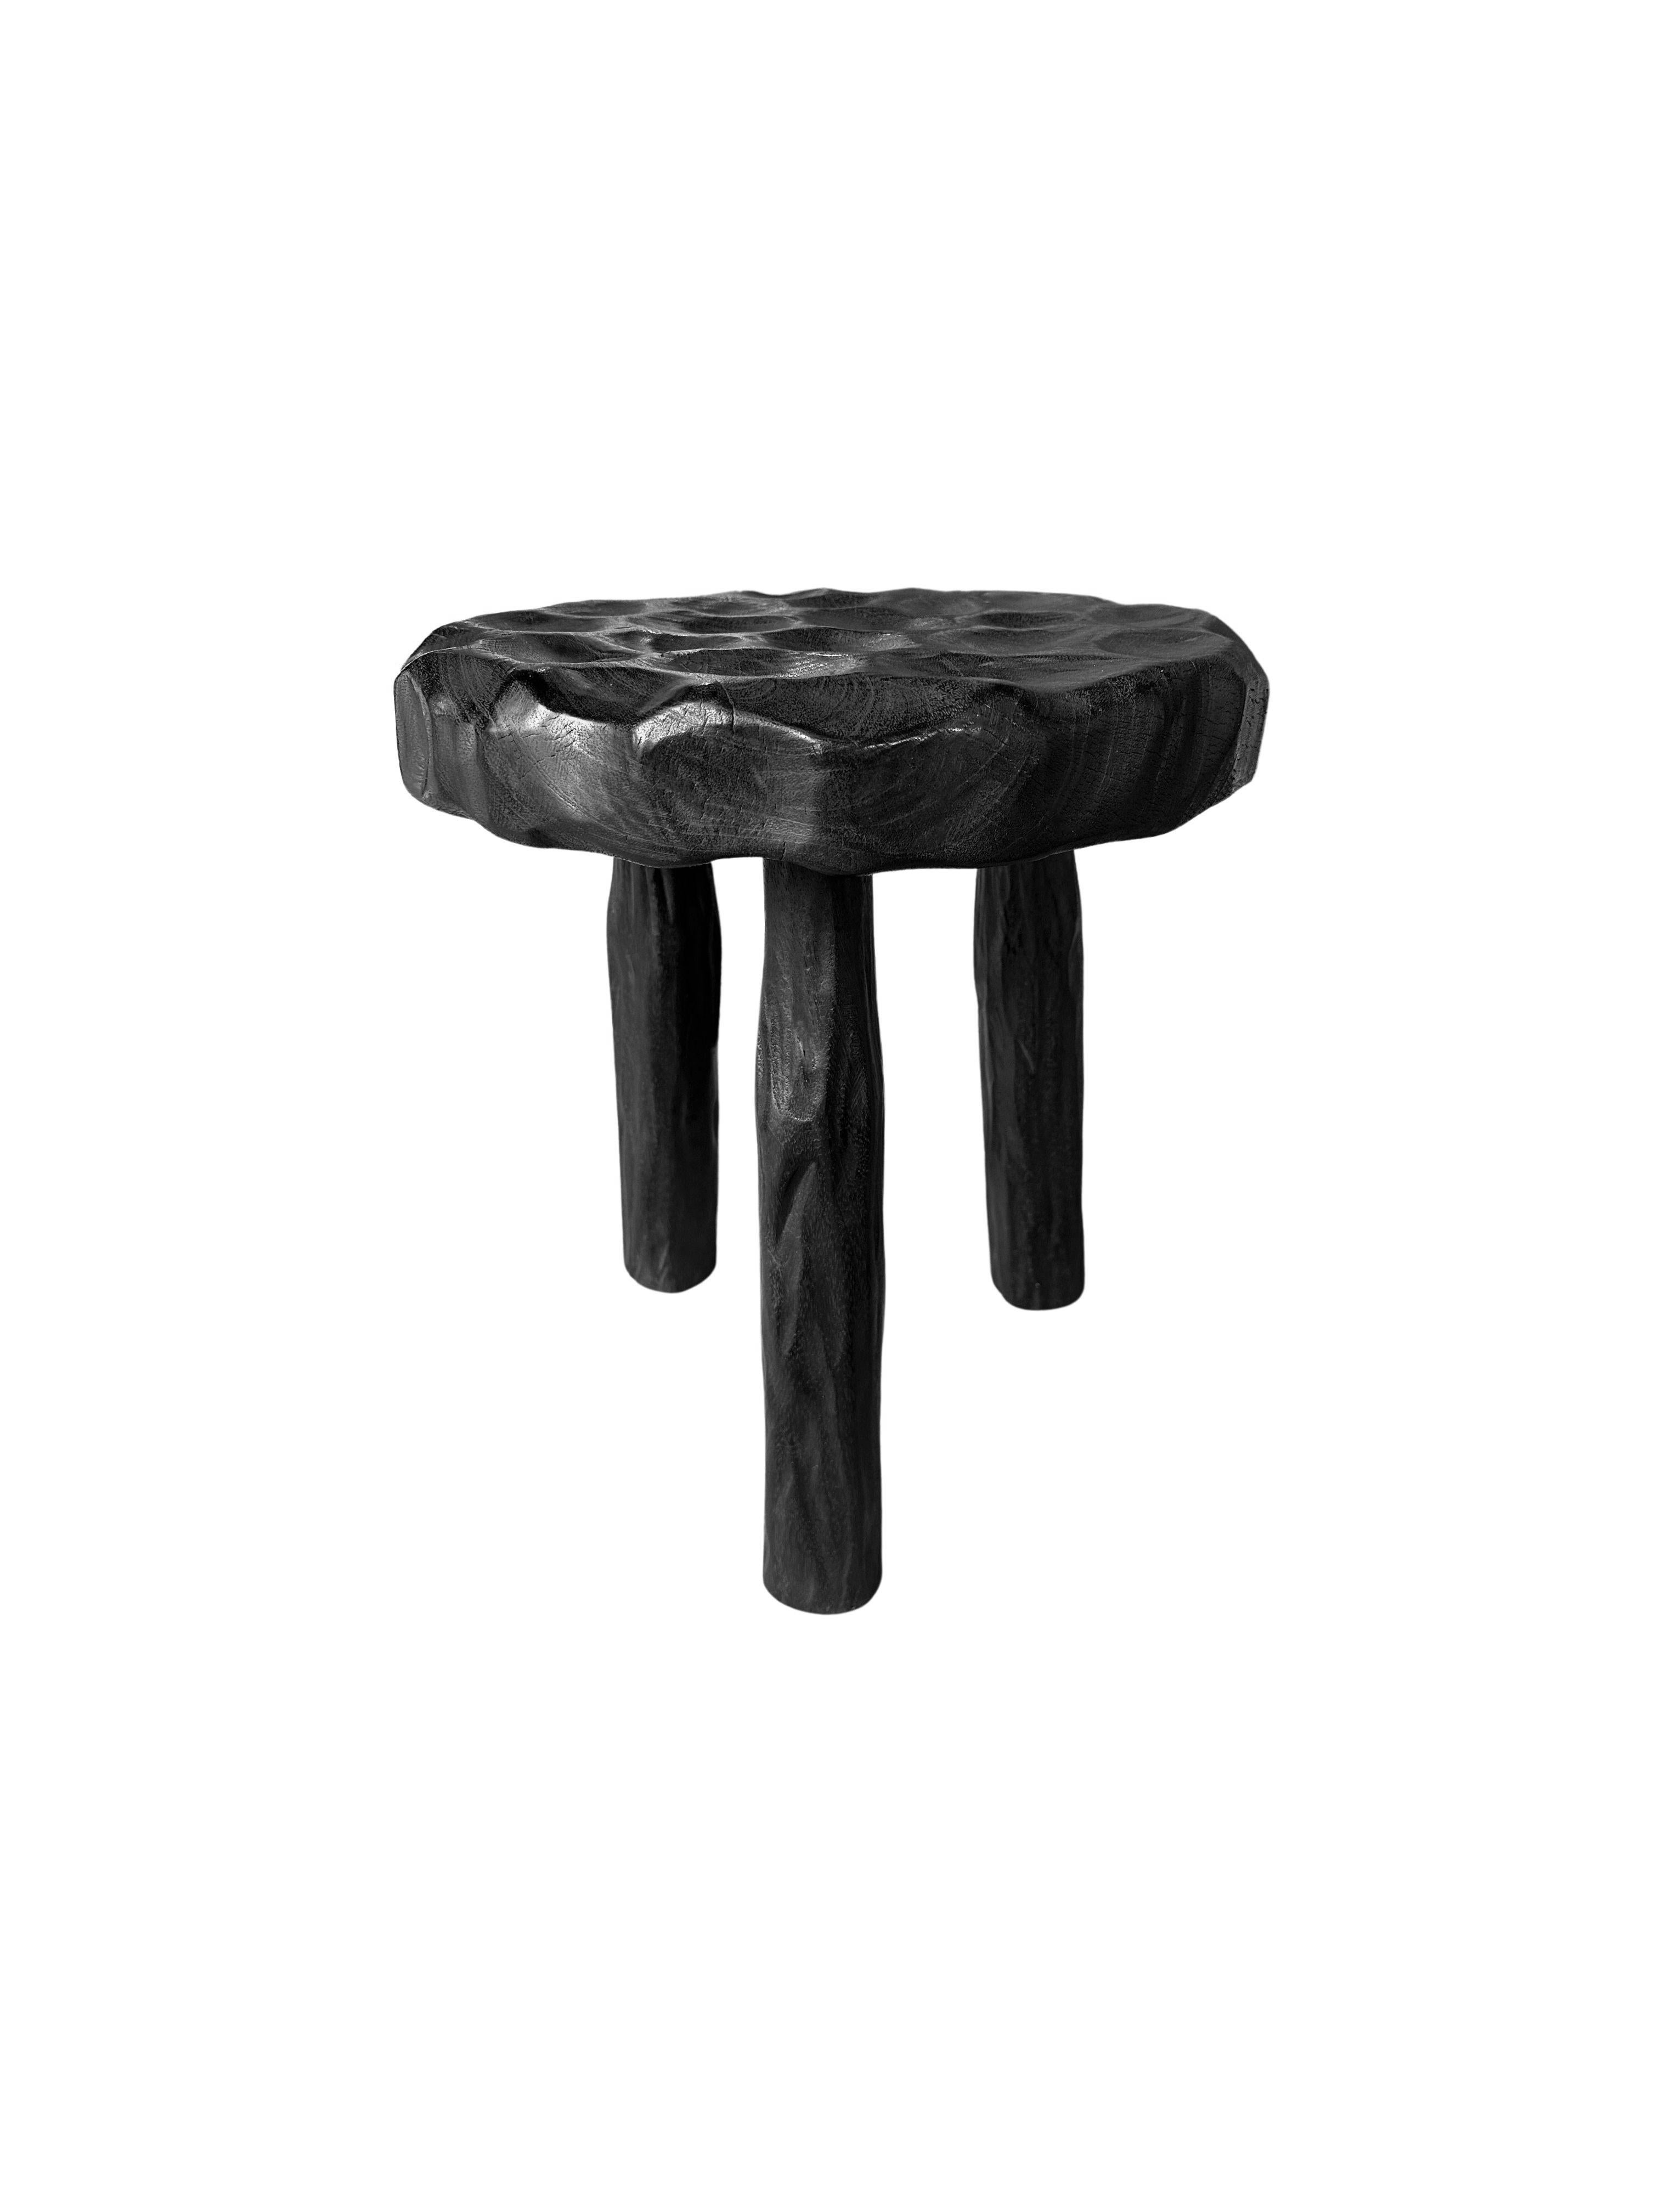 Indonesian Sculptural Stool Solid Mango Wood, Hand-Hewn Detailing, Modern Organic For Sale